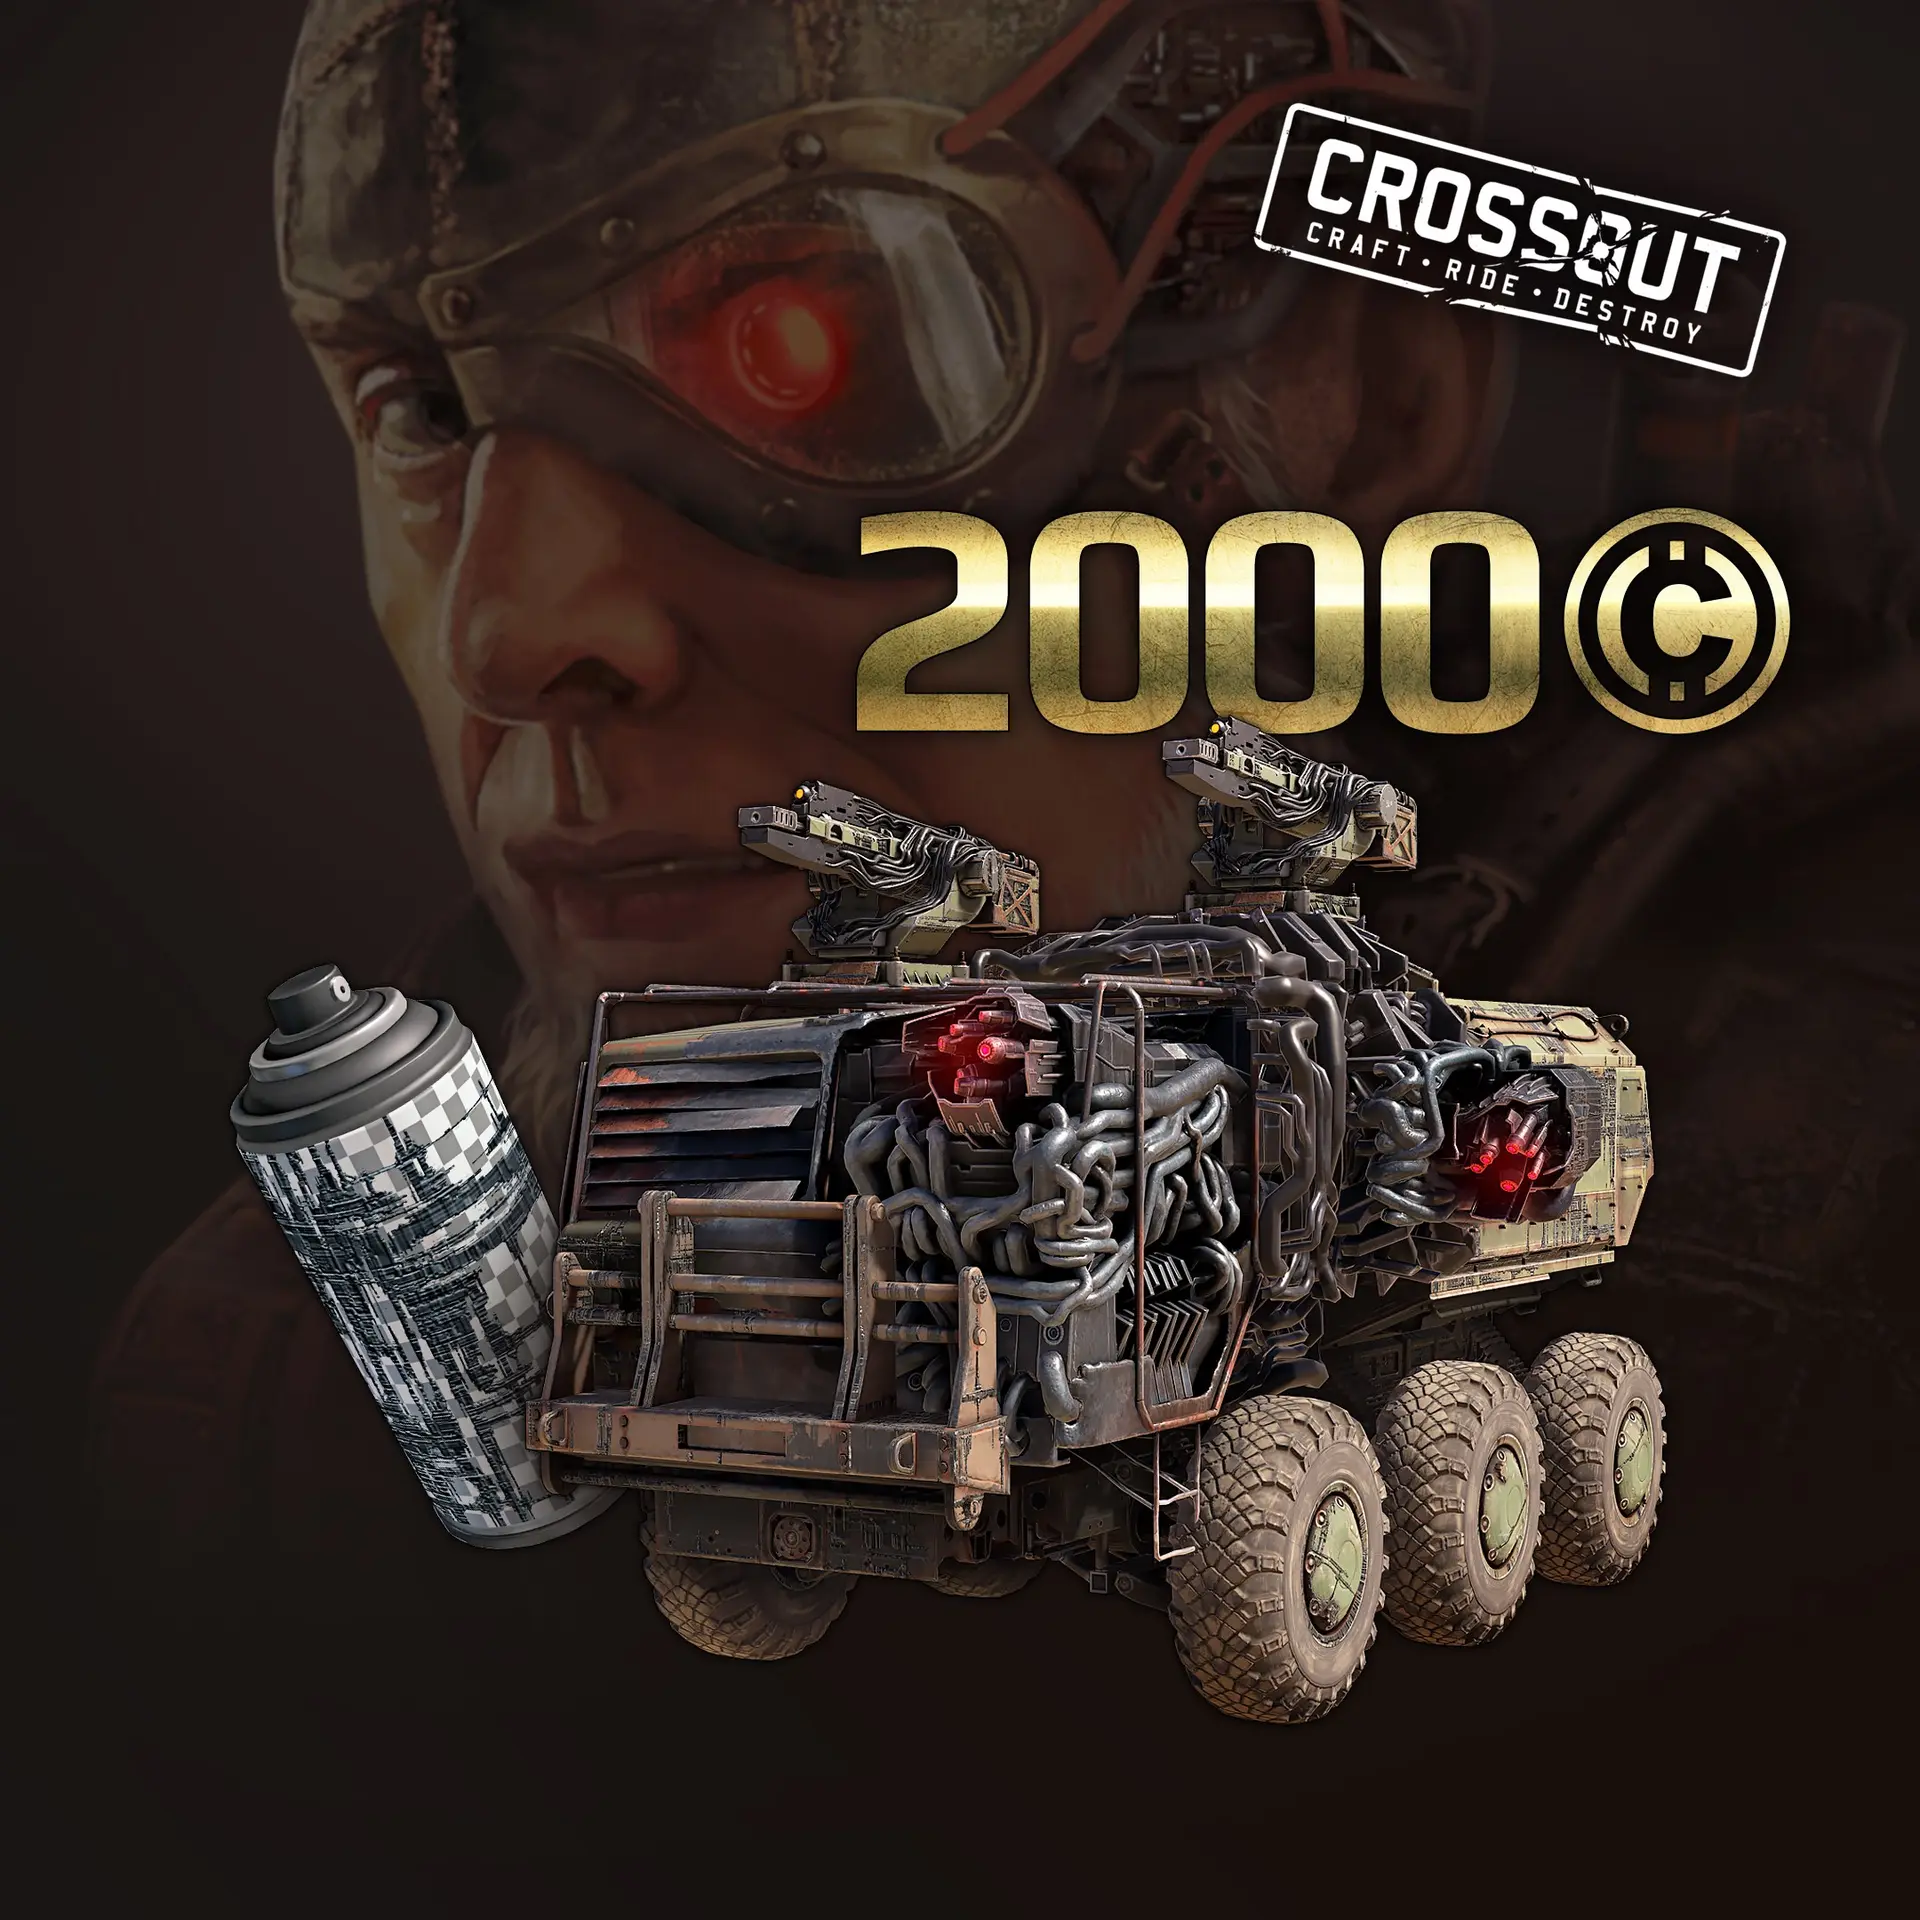 Crossout - “Polymorph” pack (Xbox Games BR)